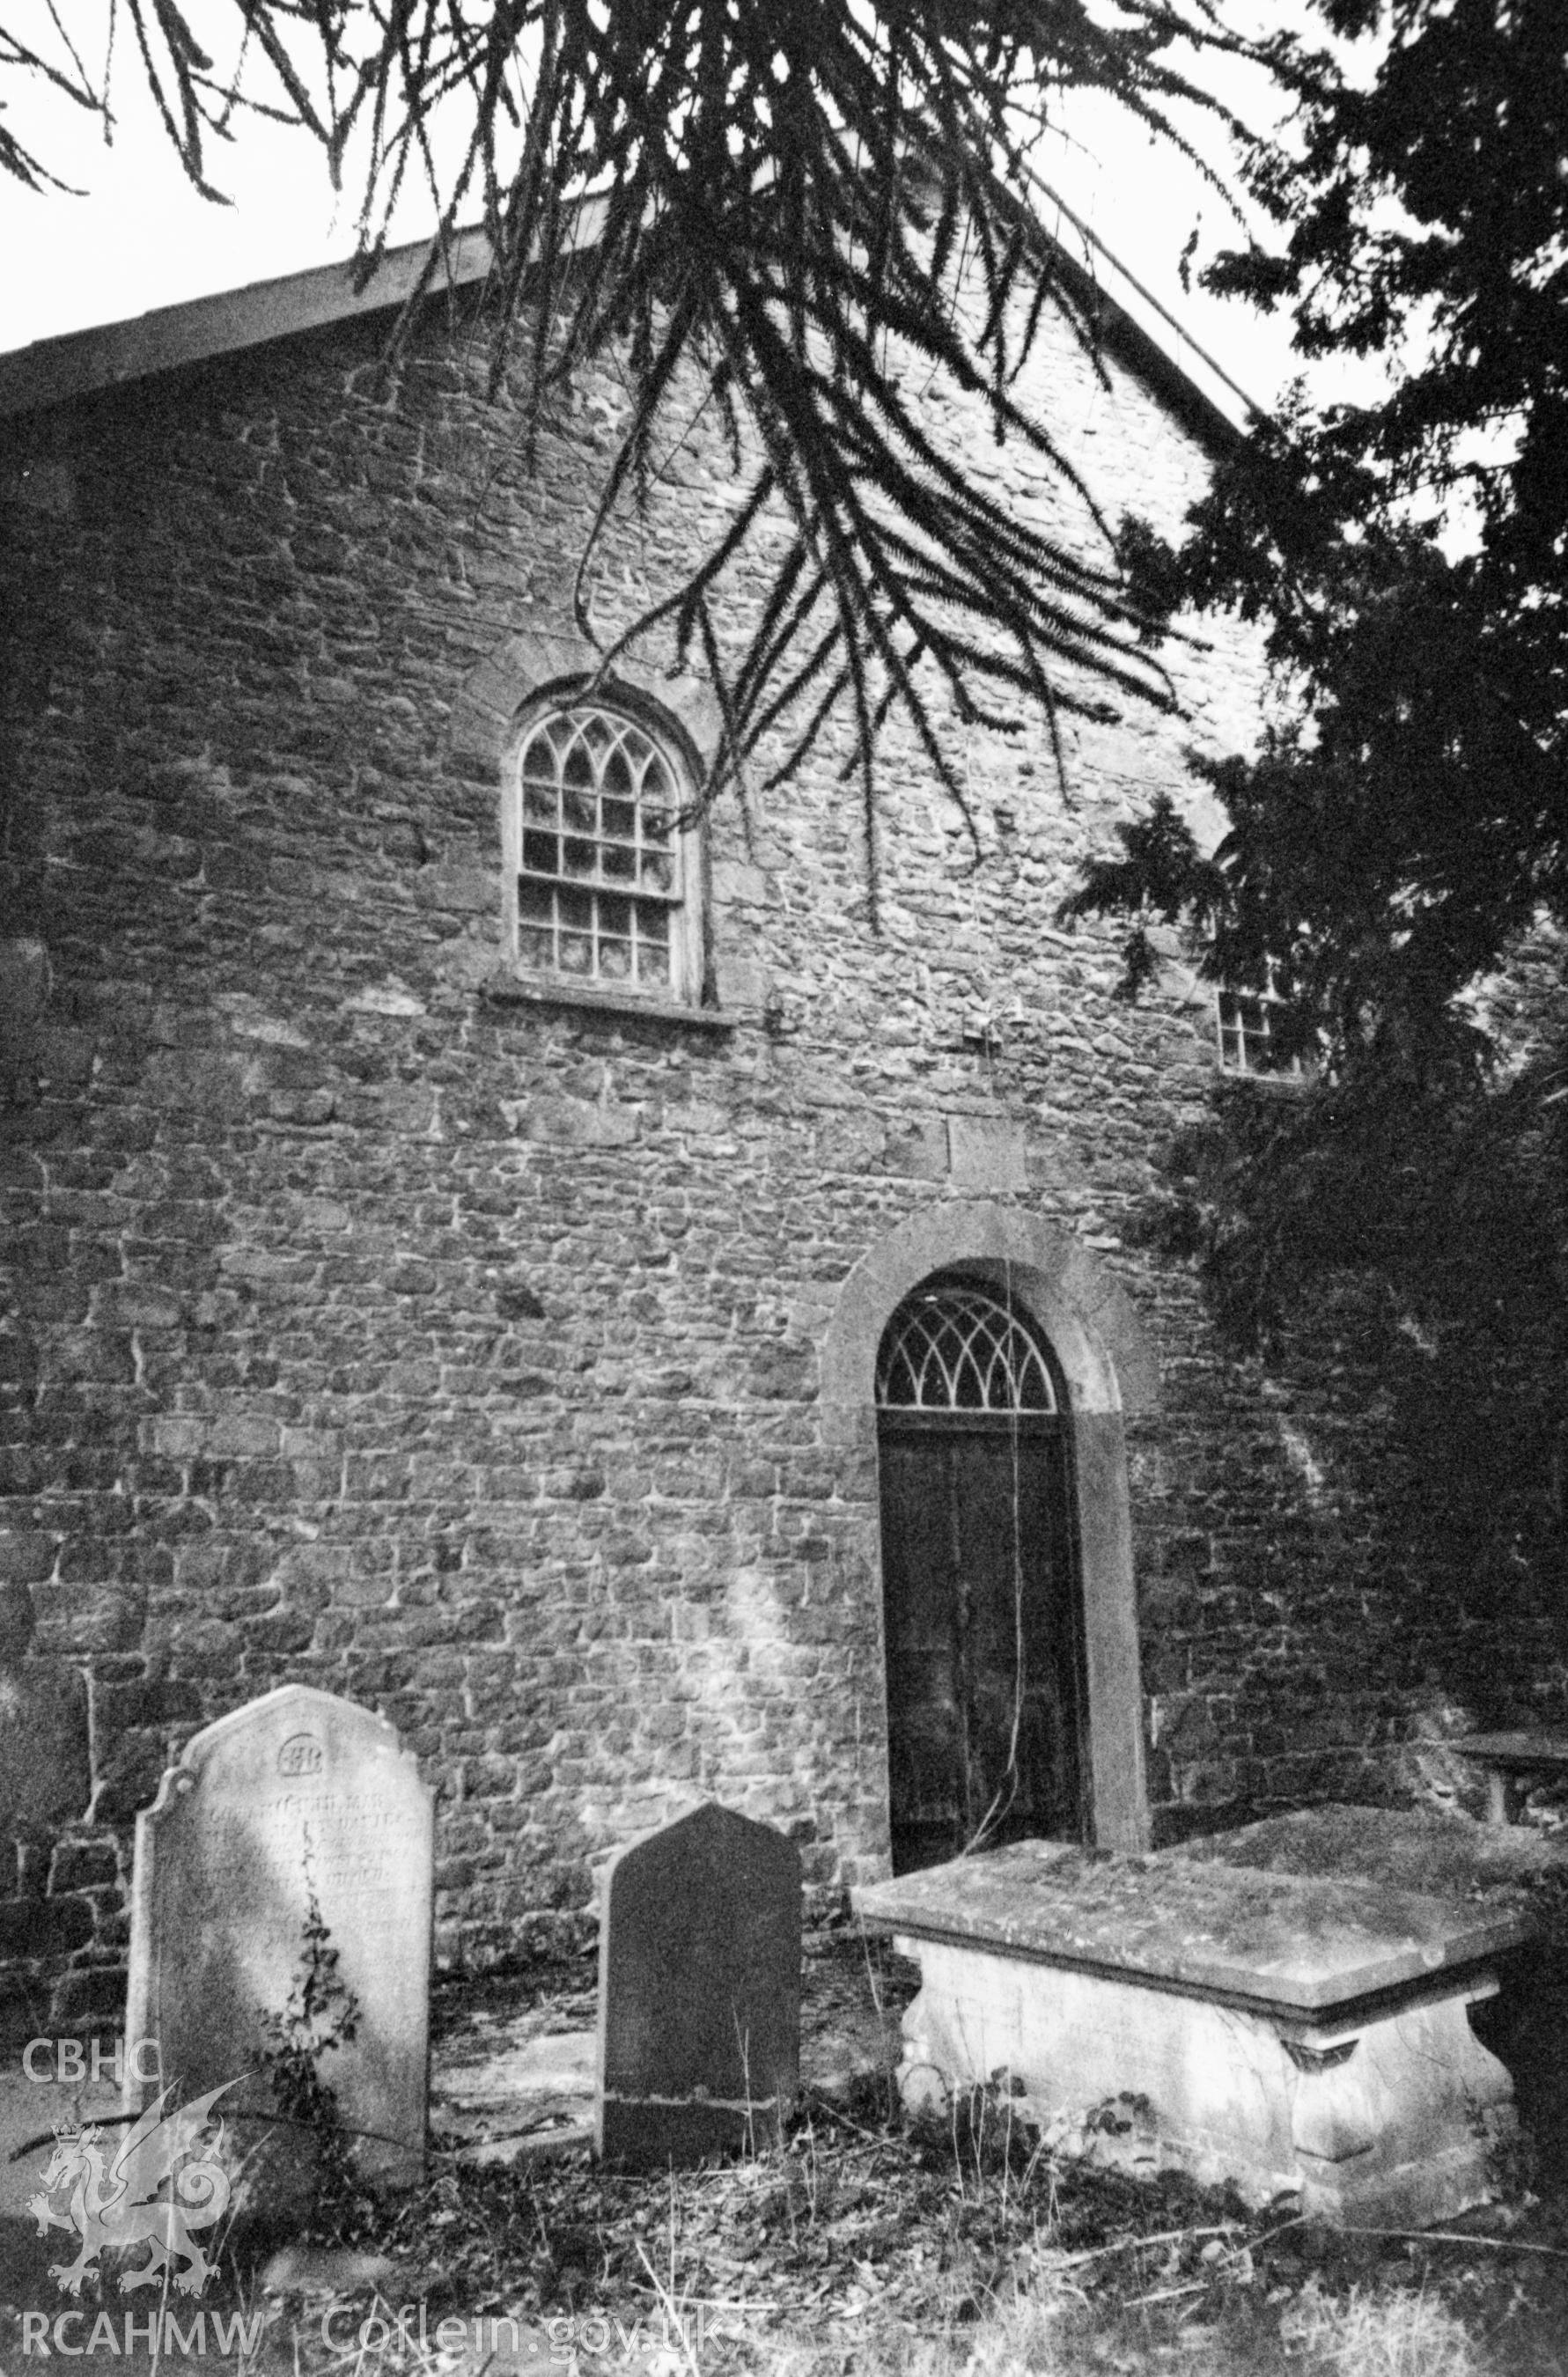 Digital copy of a black and white photograph showing an exterior view of Libanus Baptist Chapel, Llansadwrn, taken by Robert Scourfield, 1996.